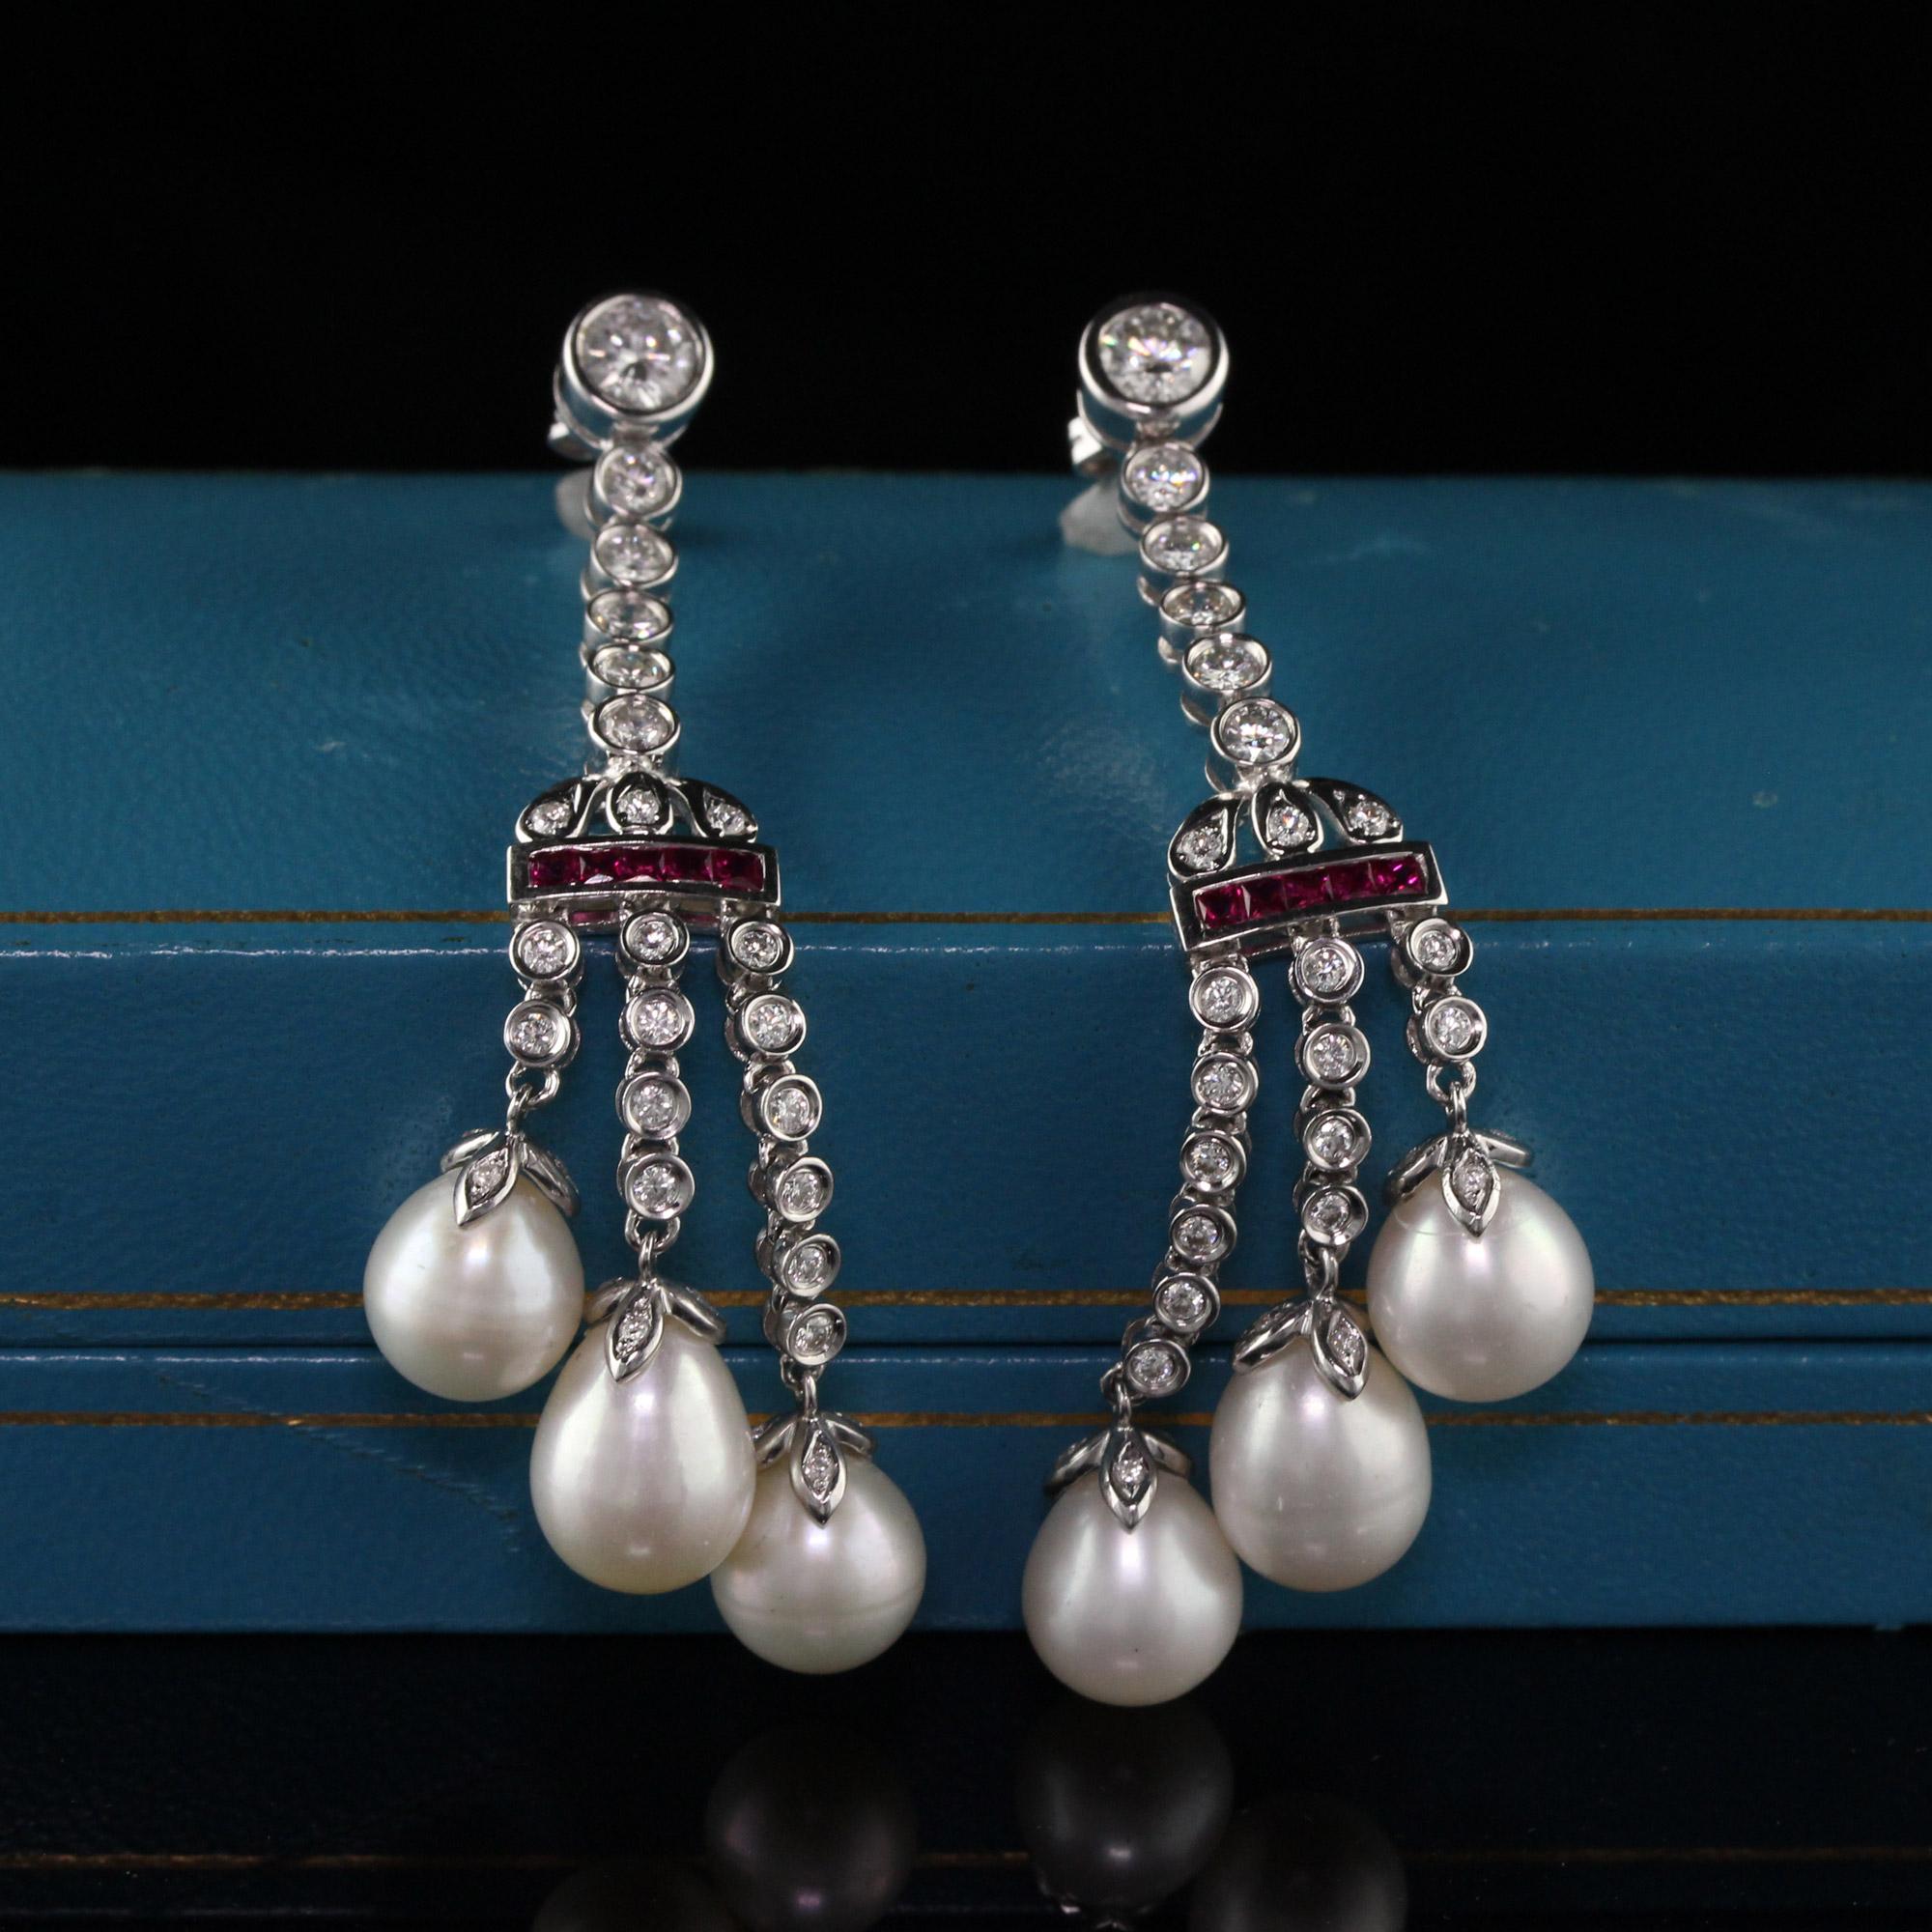 Dazzling diamond and ruby drop earrings with three dangling cultured pearls.

Metal: 18K White Gold

Weight: 17.5 Grams

Diamond Weight: Approx. 2 ct.

Diamond Color: H

Diamond Clarity: VS2

Gemstone Weight: Approx. 0.30 ct. ruby

Pearl